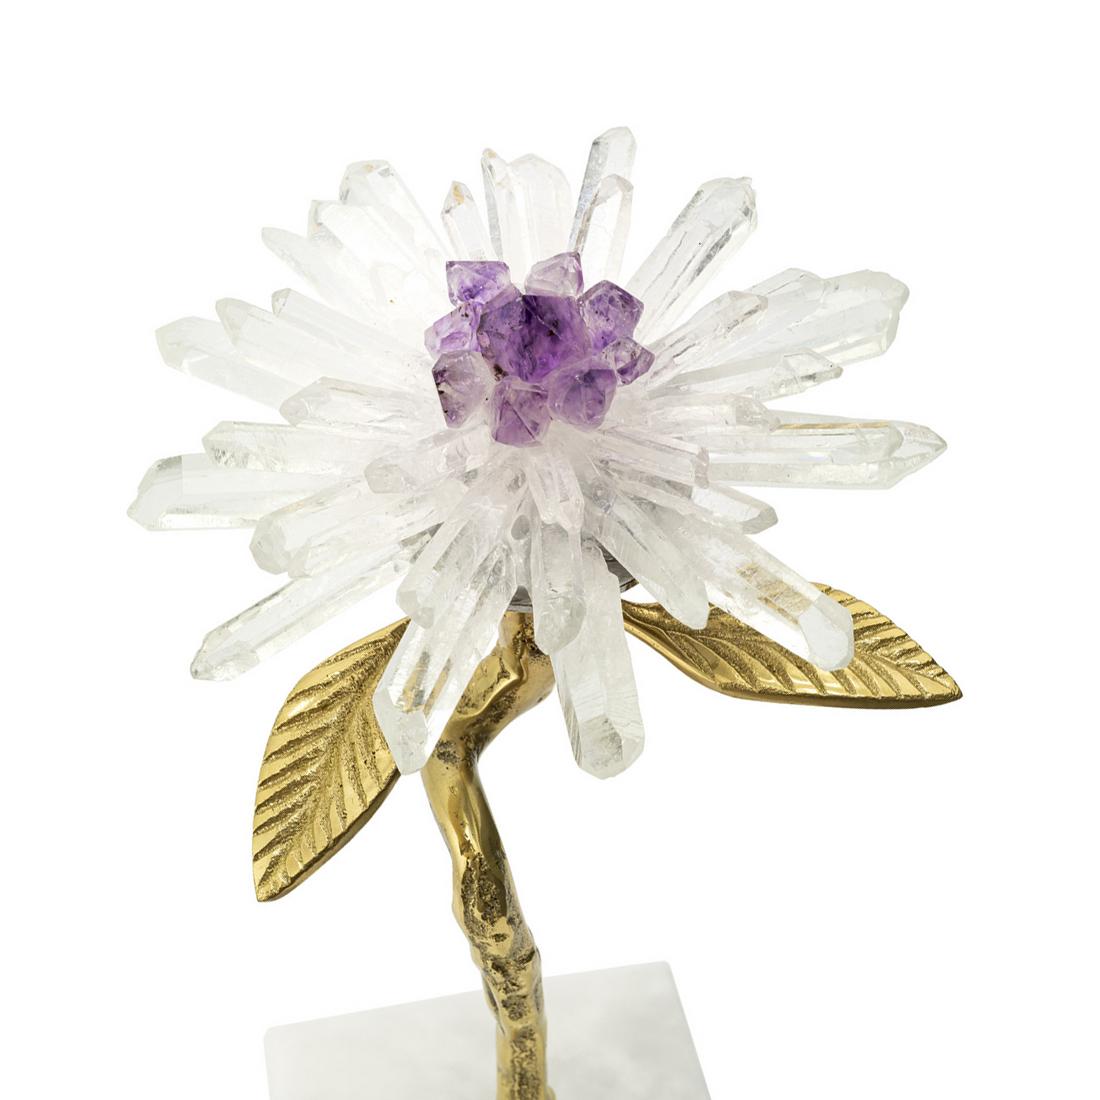 Contemporary Amethyst Flower I Sculpture For Sale